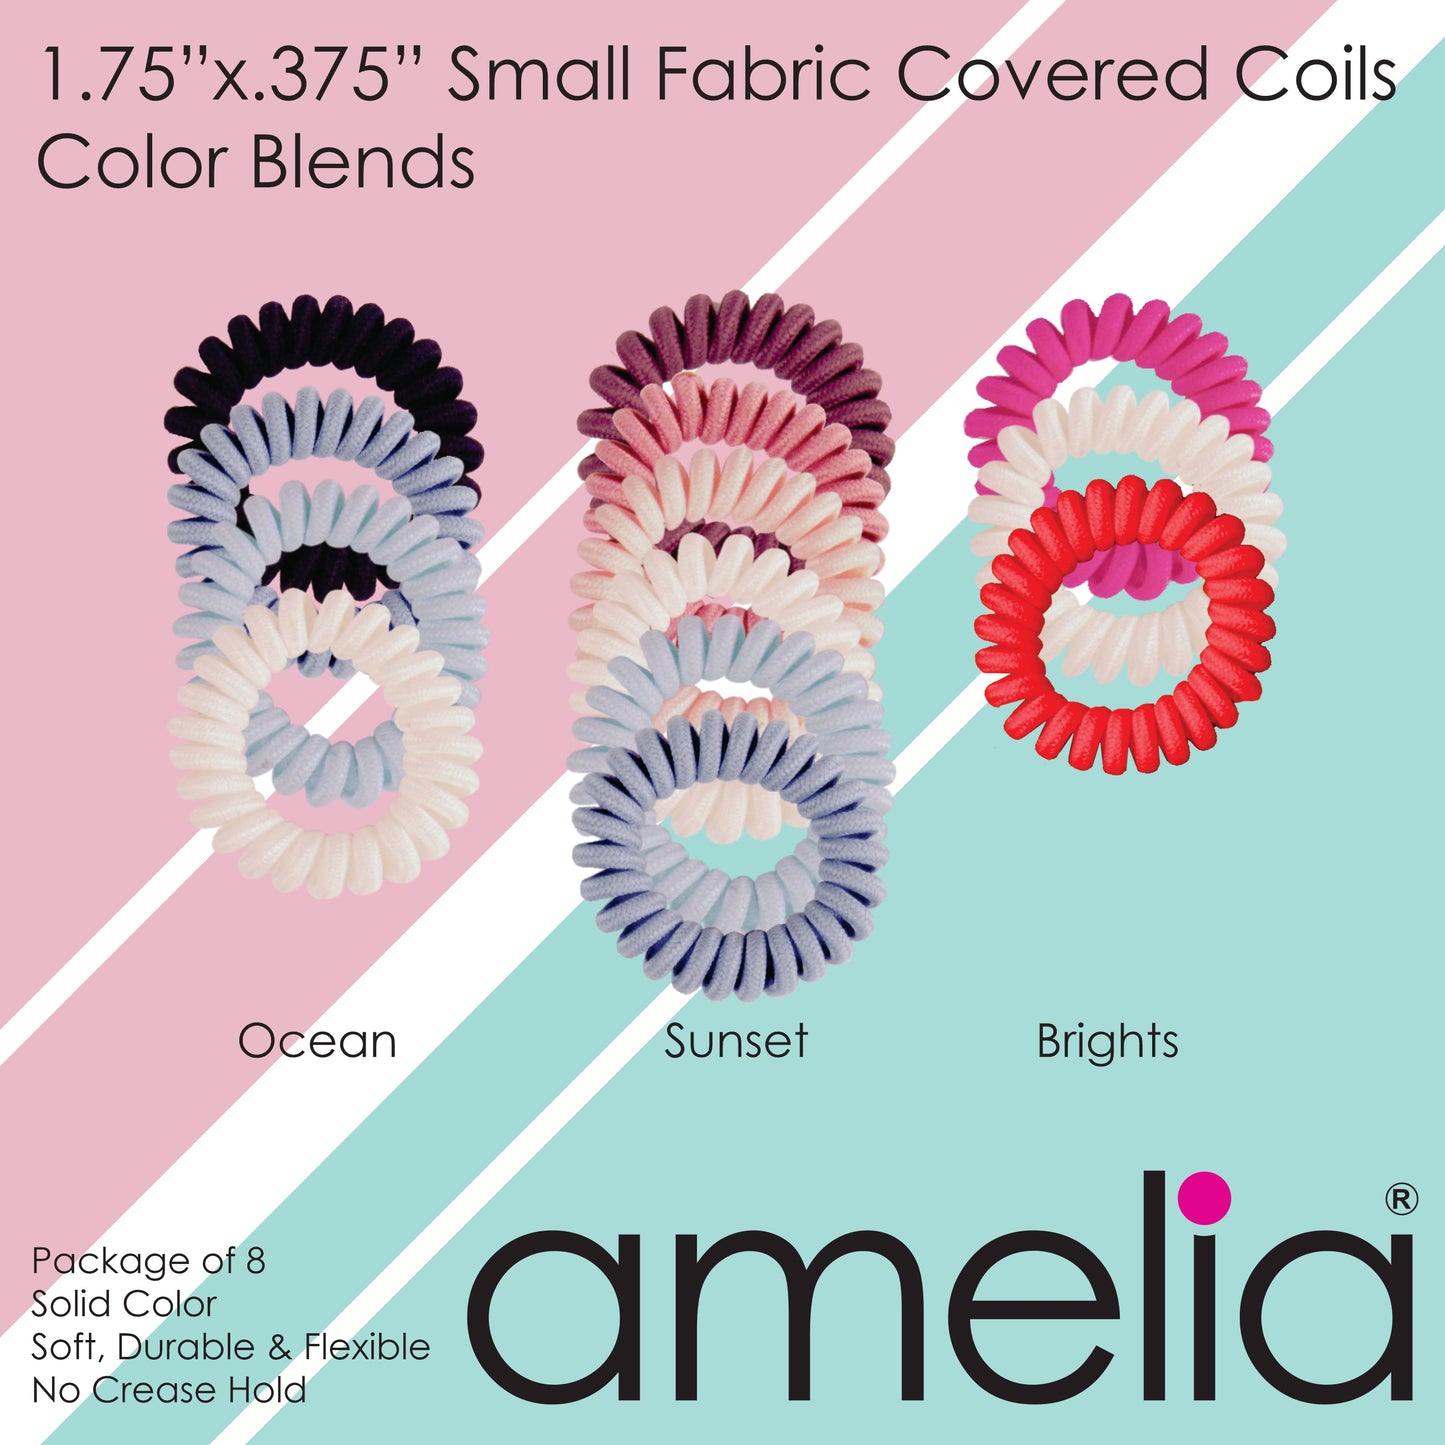 Amelia Beauty, 8 Small Fabric Wrapped Elastic Hair Coils, 1.75in Diameter Spiral Hair Ties, Gentle on Hair, Strong Hold and Minimizes Dents and Creases, Pink